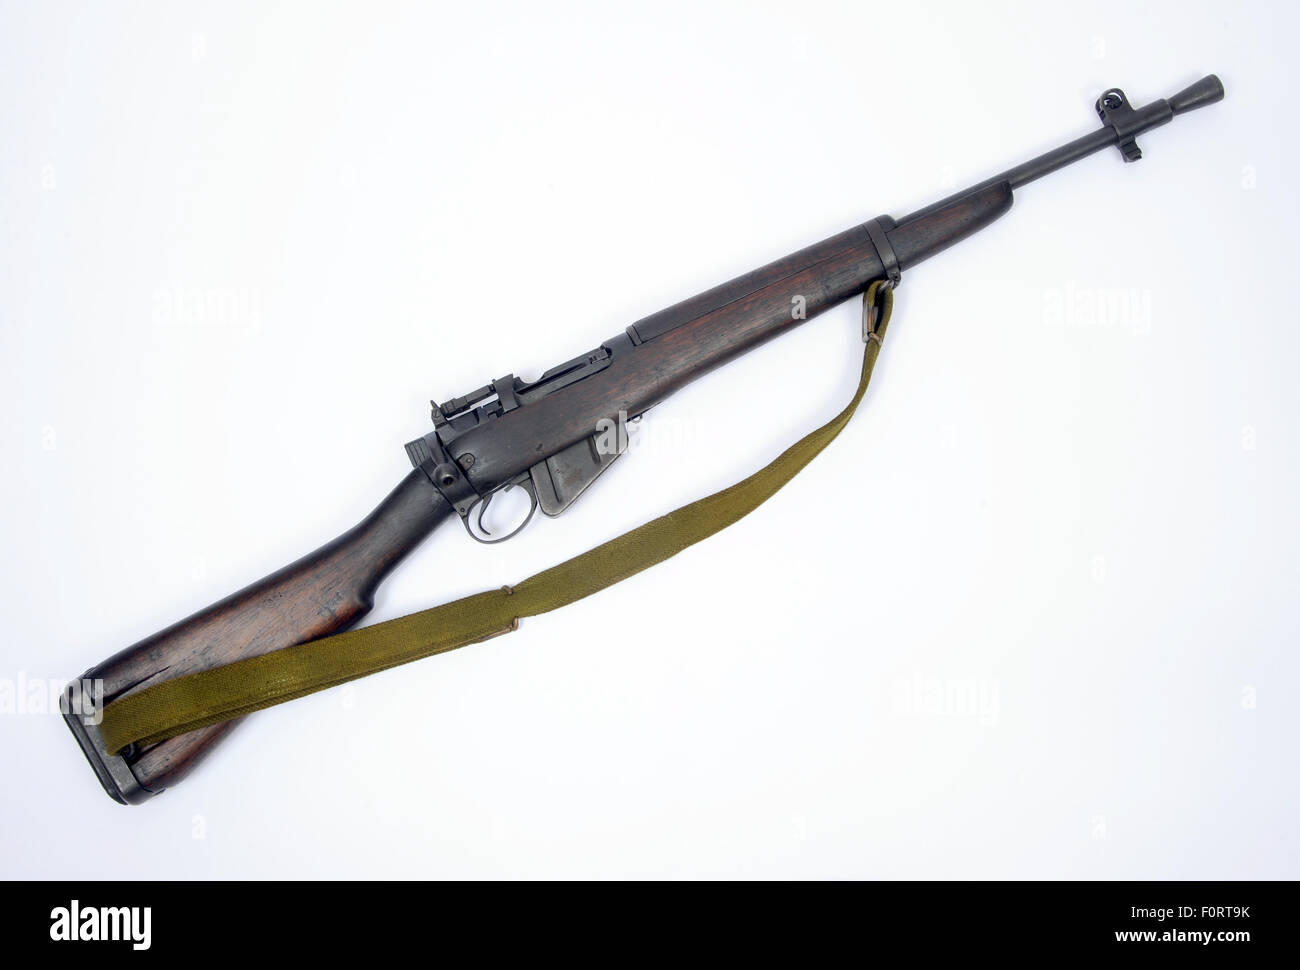 WW11 British Lee Enfield number five jungle carbine and bayonet as used in the Far East against the Japanese ww2 Stock Photo